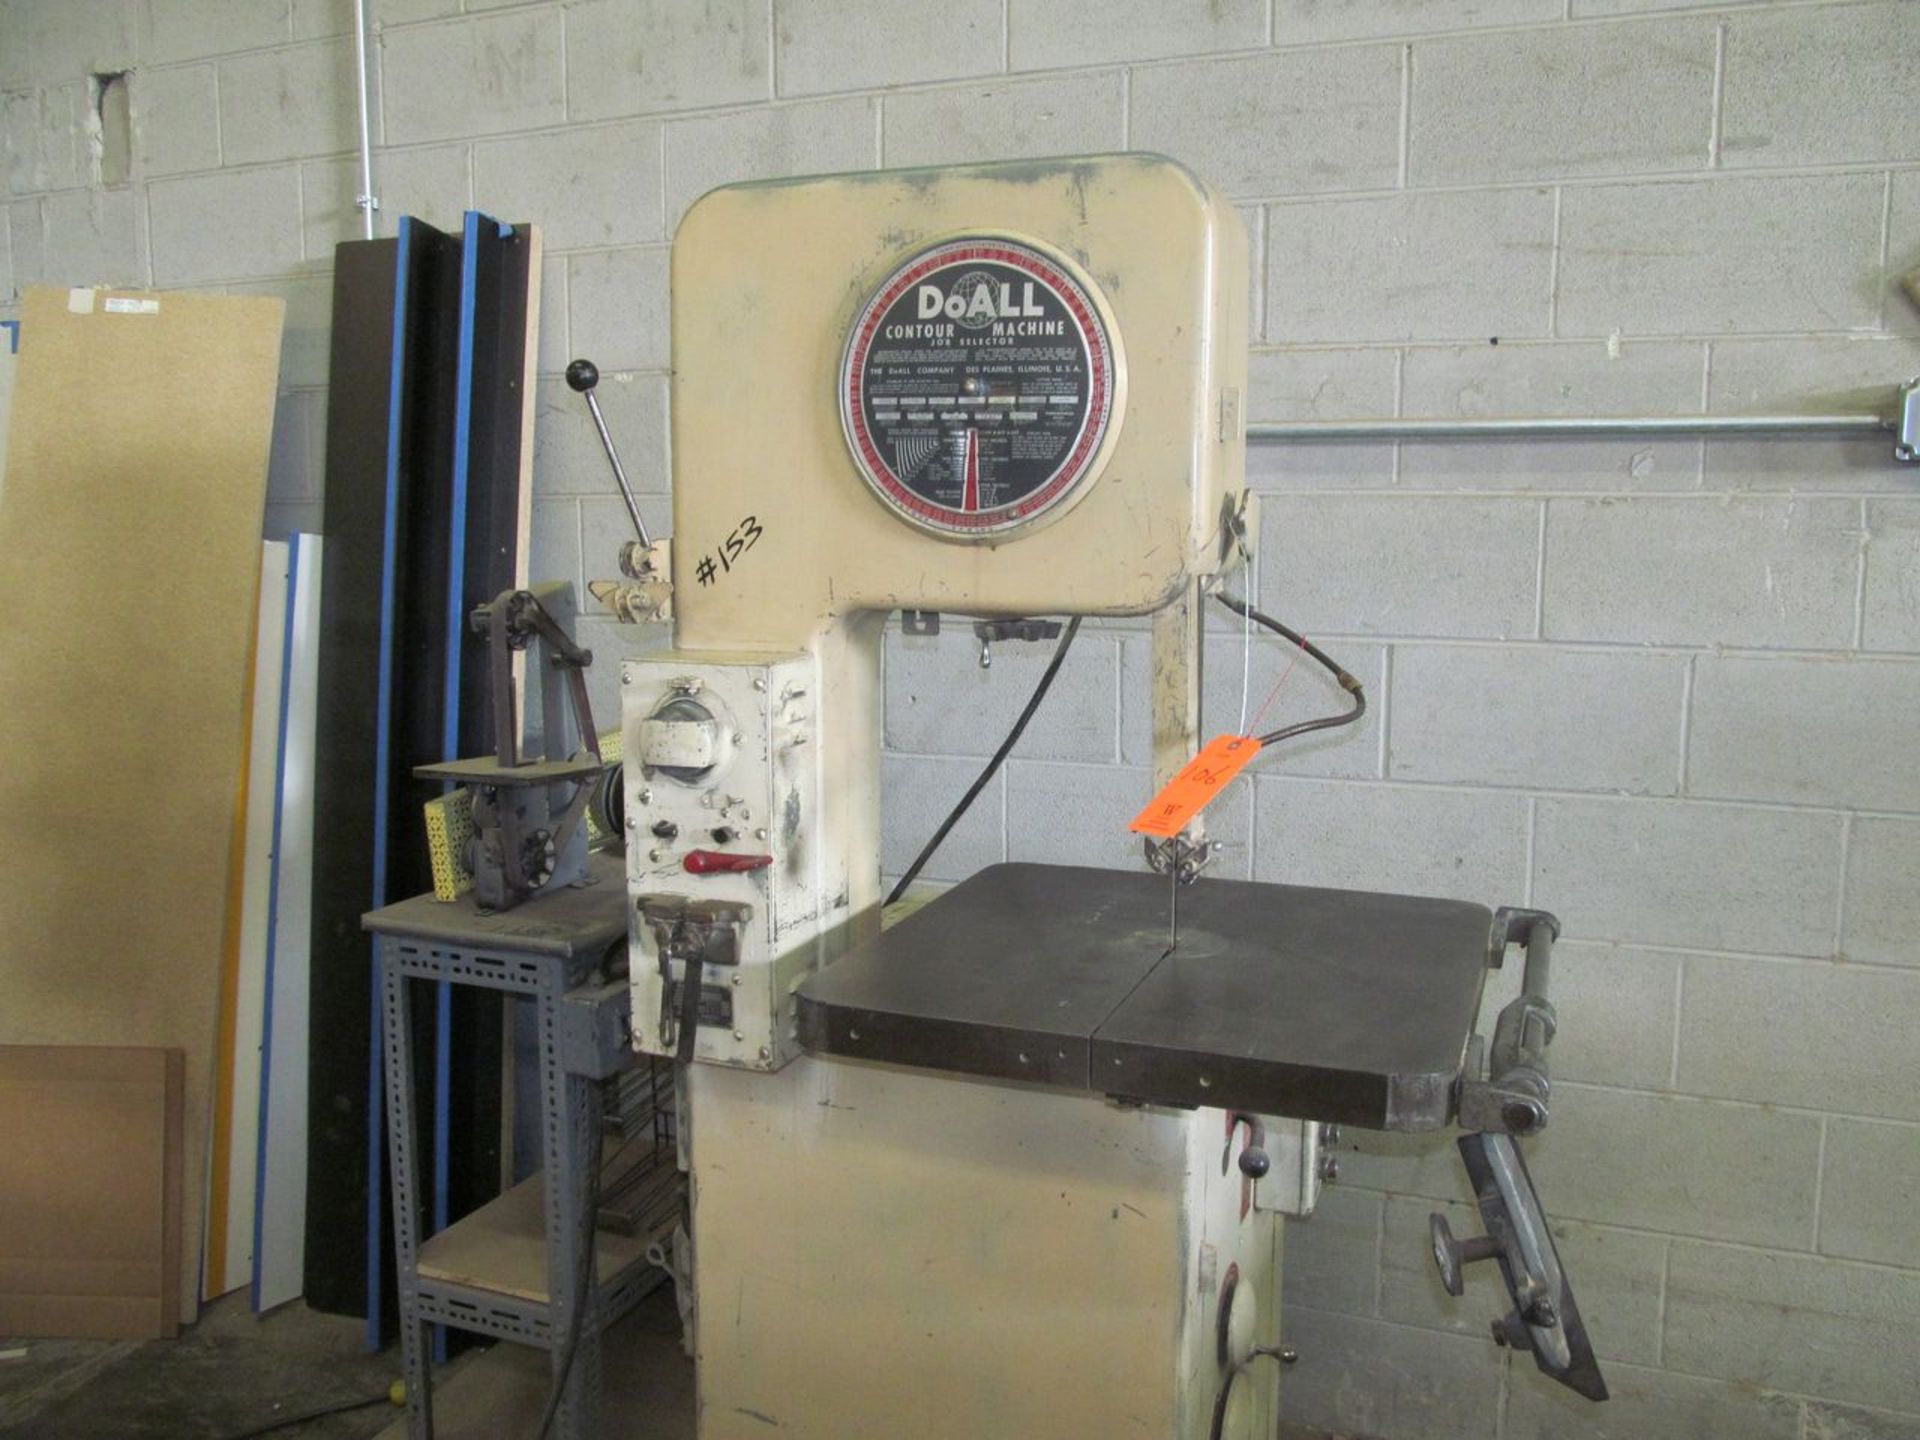 DoAll 16 in. Model 16-S.F.P. Job Selector Contour Vertical Band Saw, S/N: 79-561262; with 24 in. x